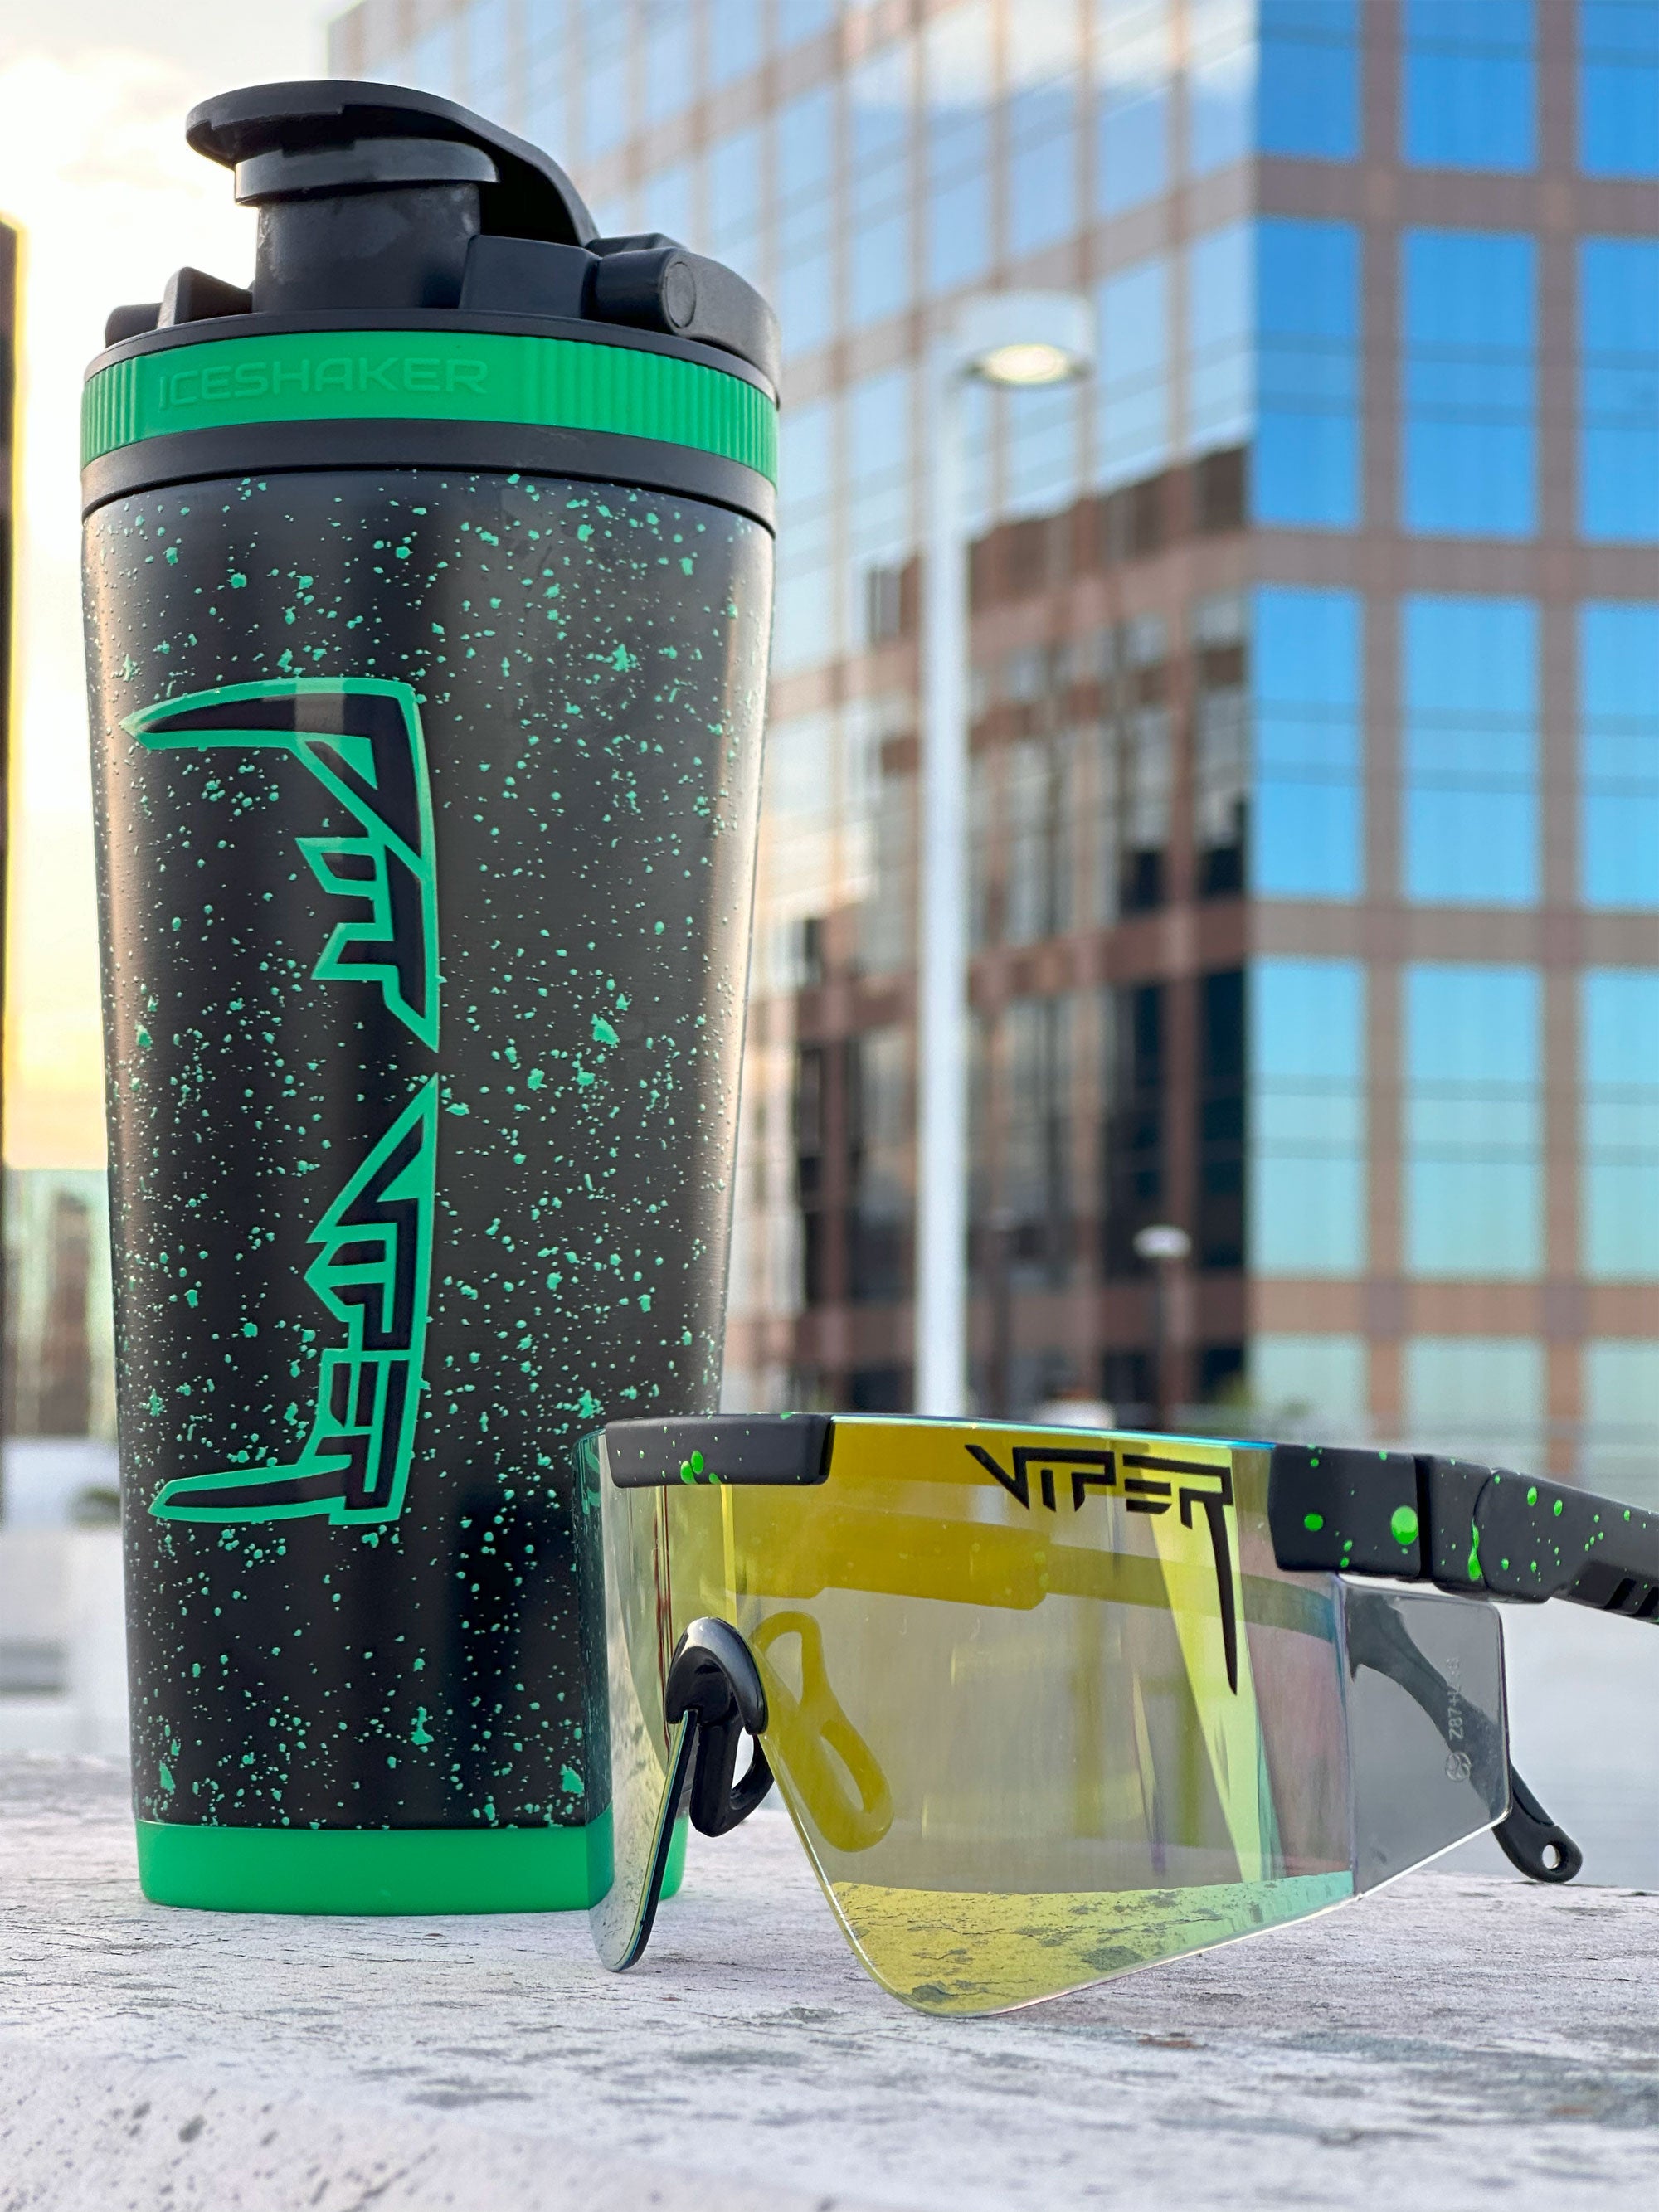 The Custom Pit Viper 26oz Ice Shaker and Pit Viper Sunglasses are next to each other on a concrete platform. Behind them are high-rise buildings.